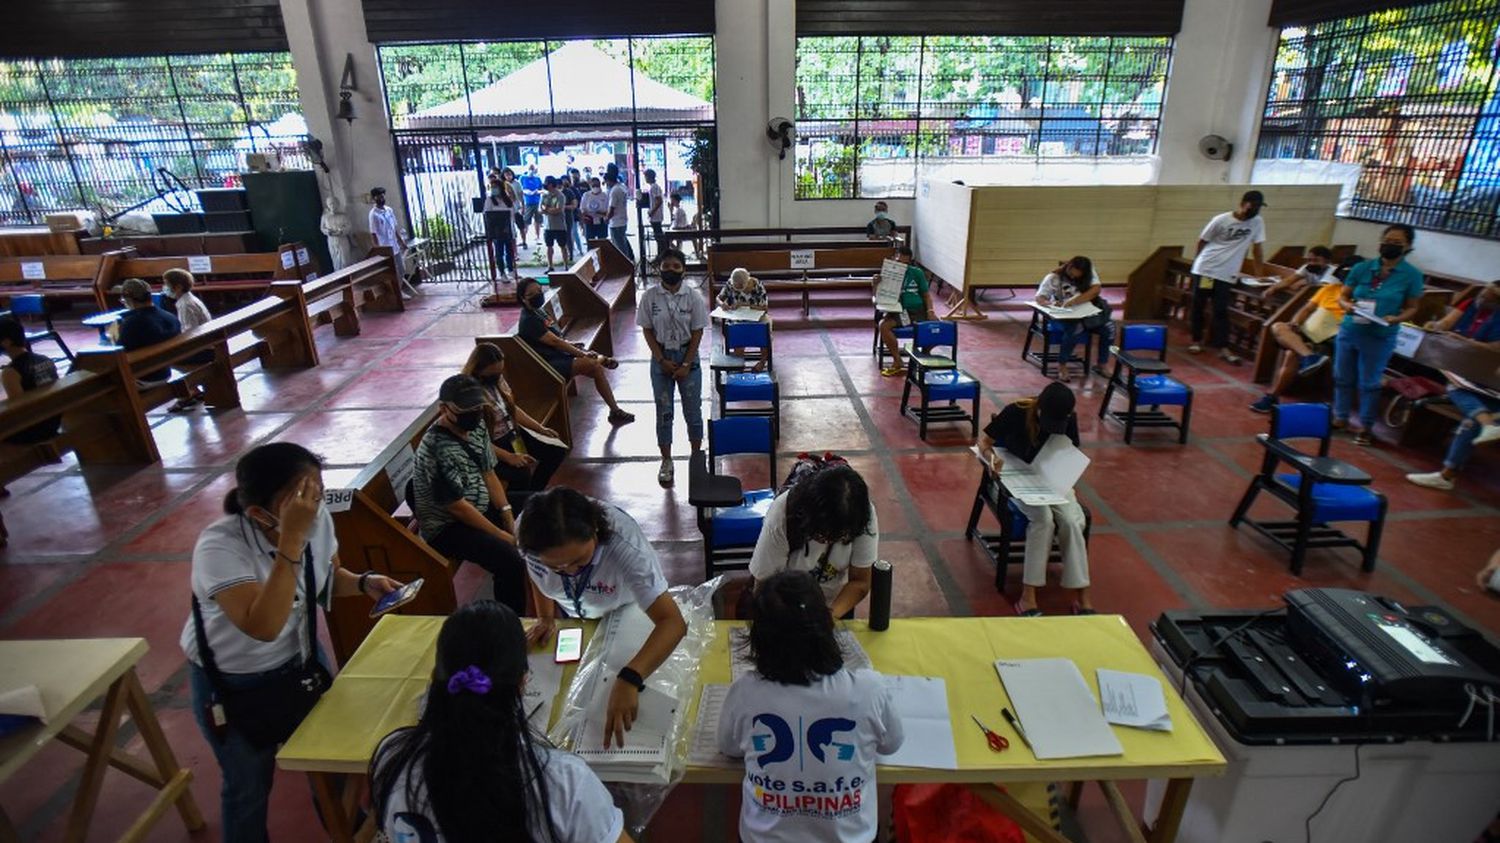 In the Philippines, three security agents killed in the attack on a polling station
